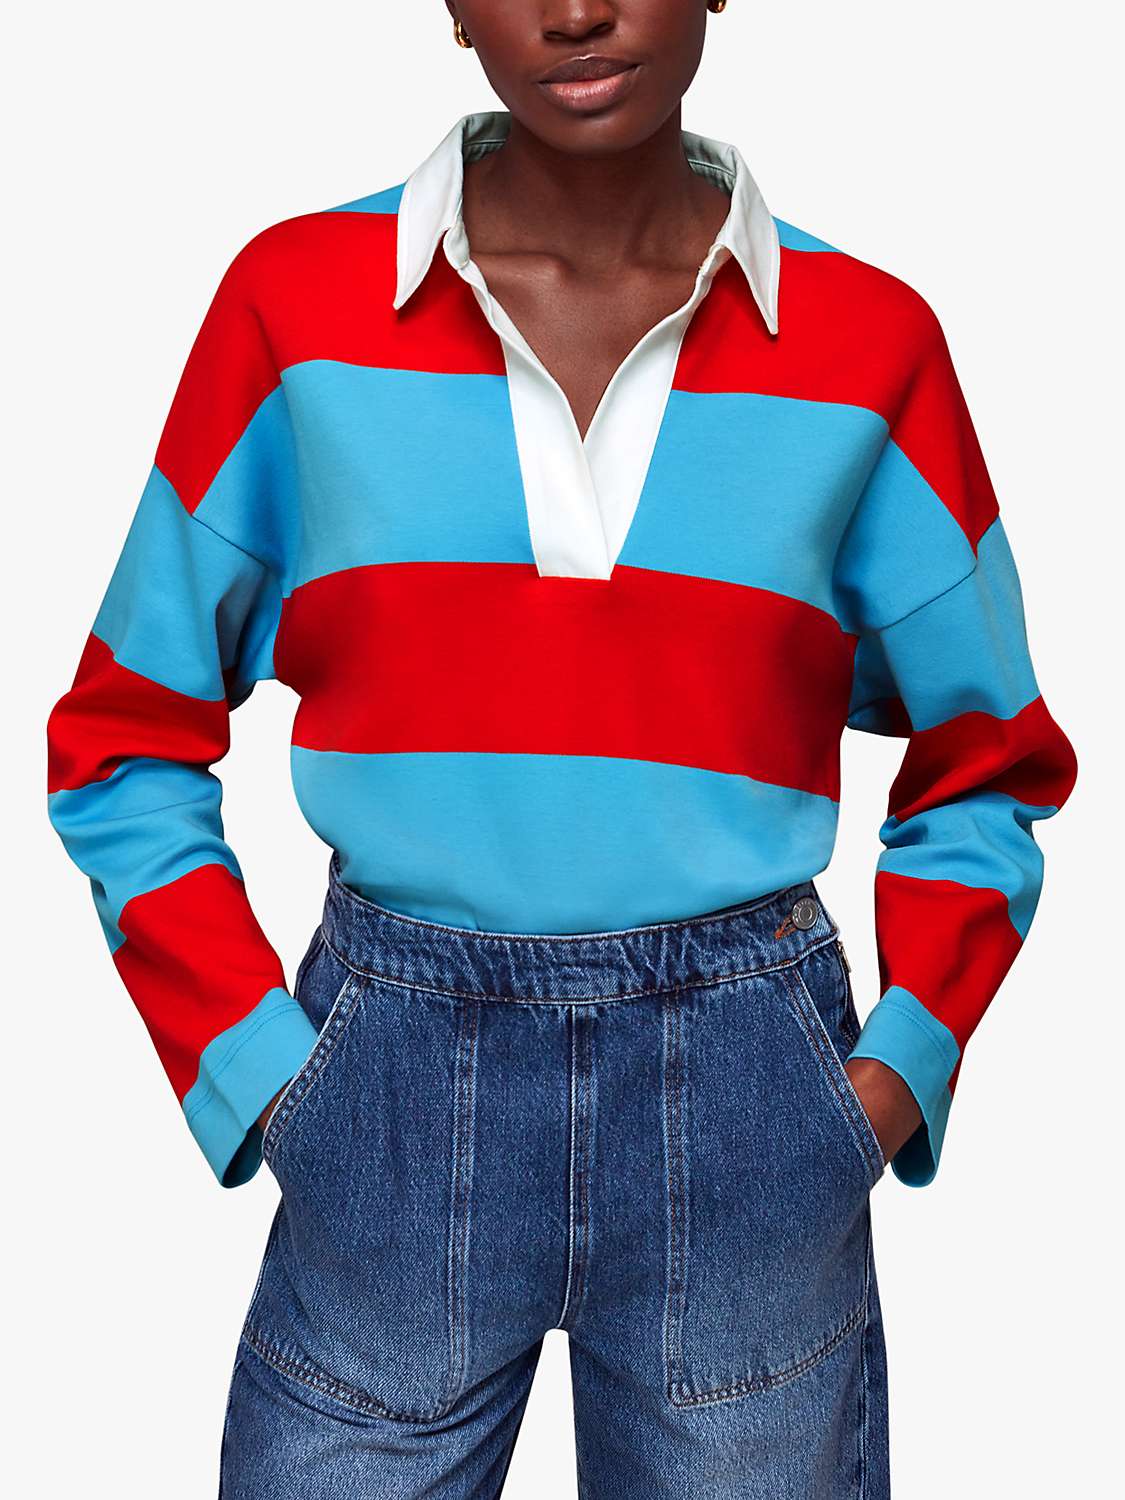 Buy Whistles Cotton Stripe Rugby Shirt, Red/Multi Online at johnlewis.com